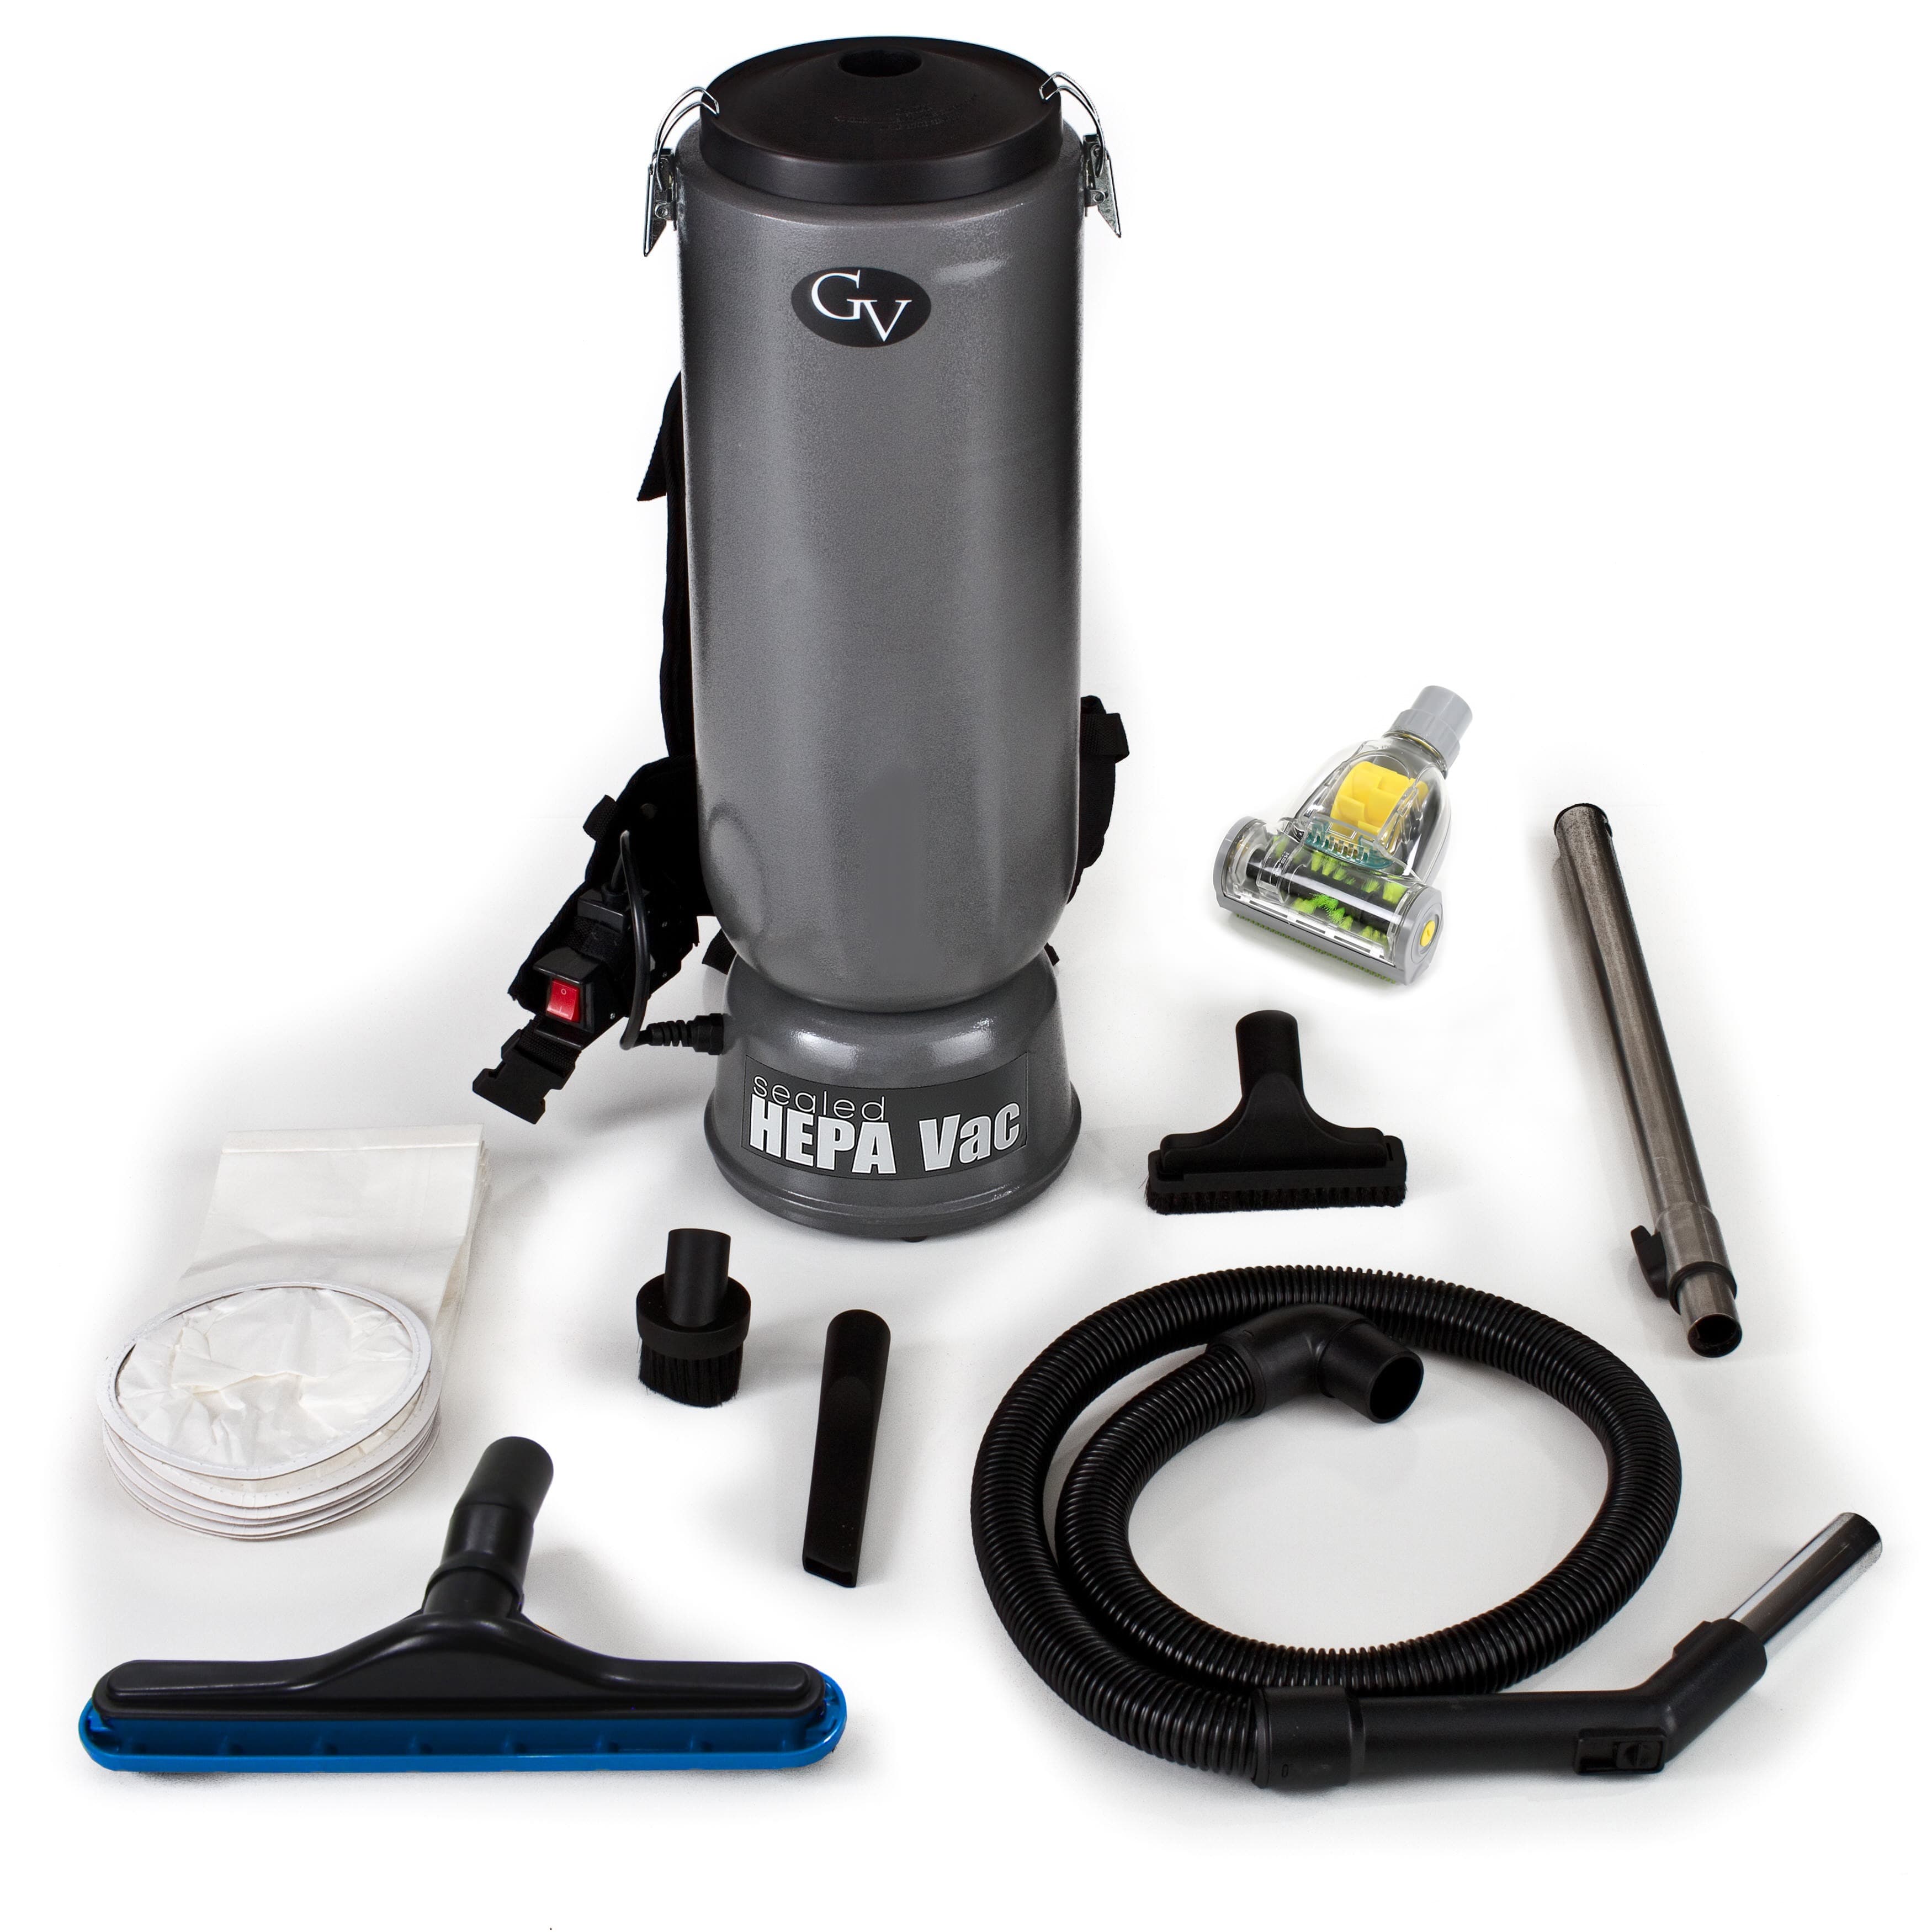 GV 10 Quart Commercial BackPack Most Powerful Vacuum - image 2 of 6